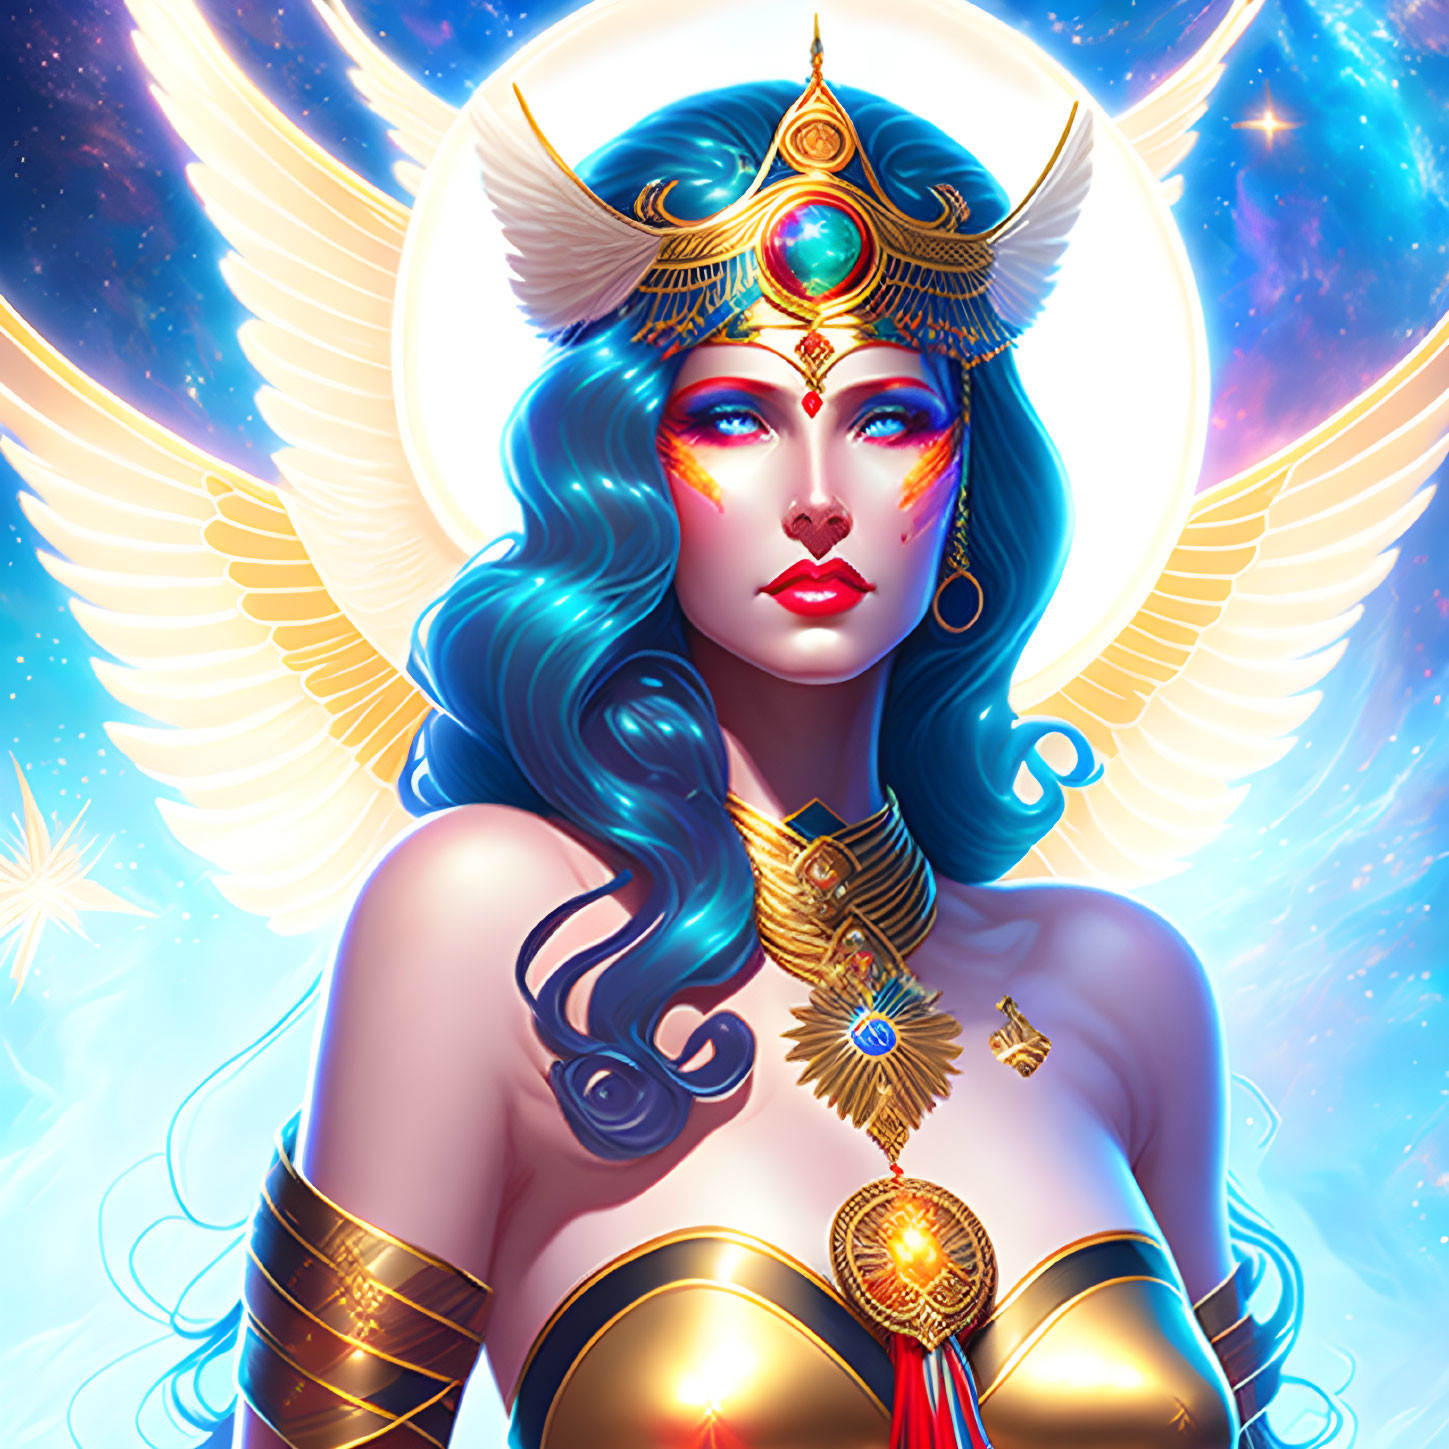 OUR LADY OF THE MANY FORMS - PROMETHEA 03-30-2023